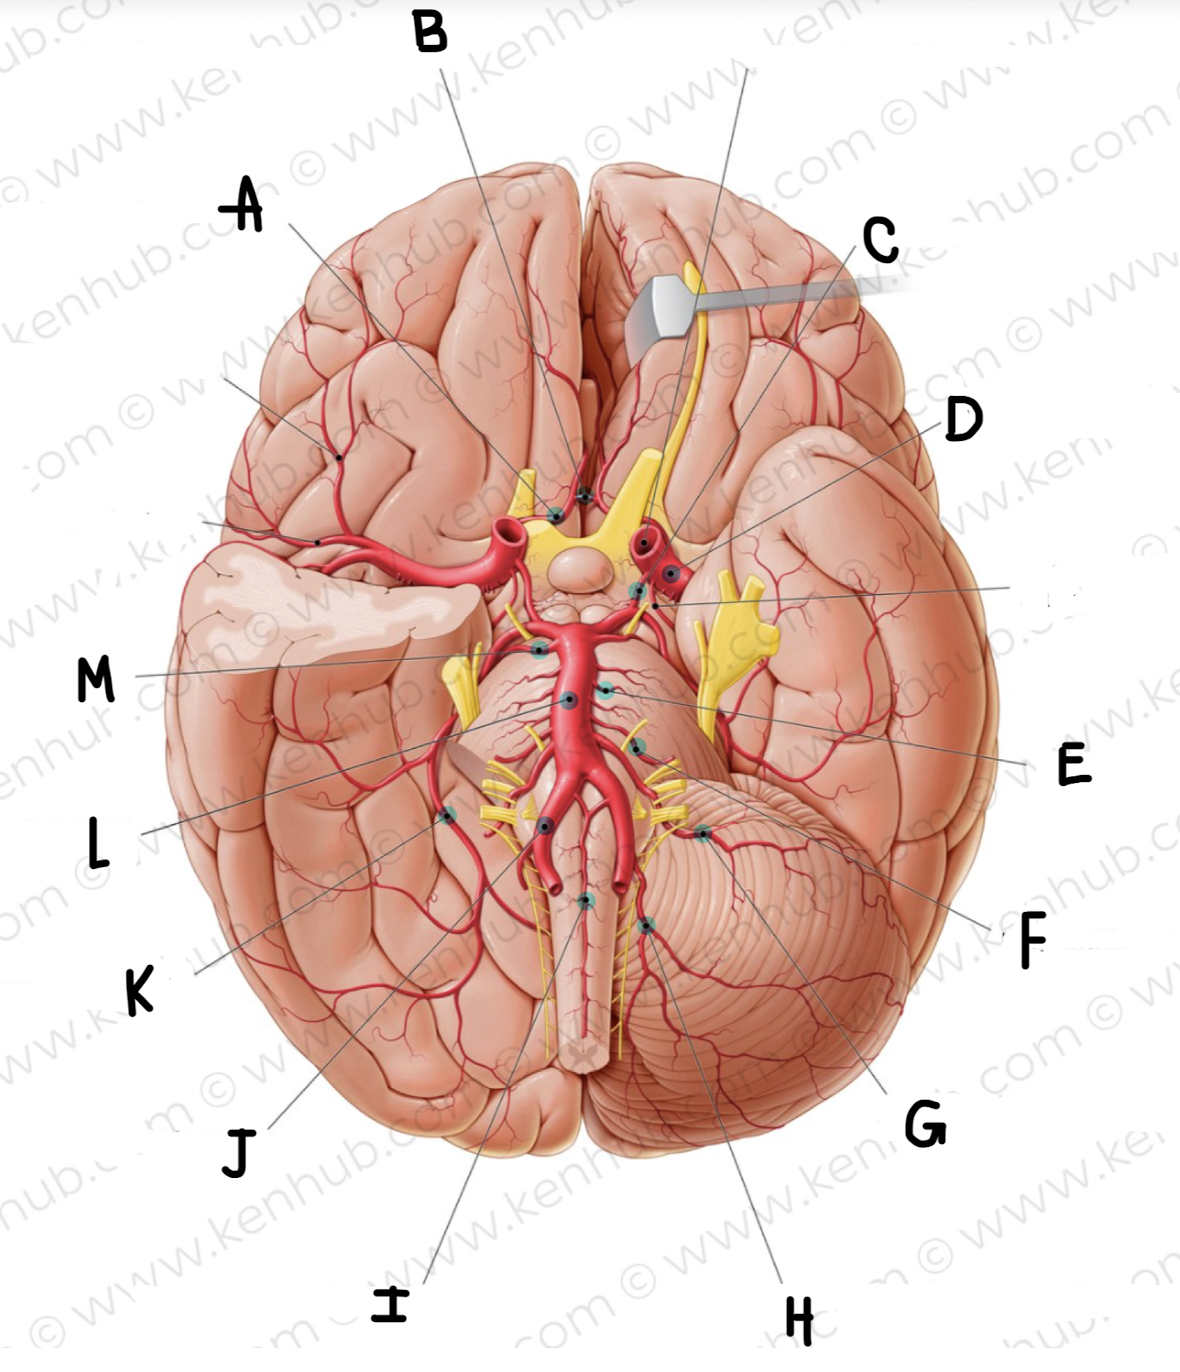 <p>What is the name of the artery labeled F?</p>